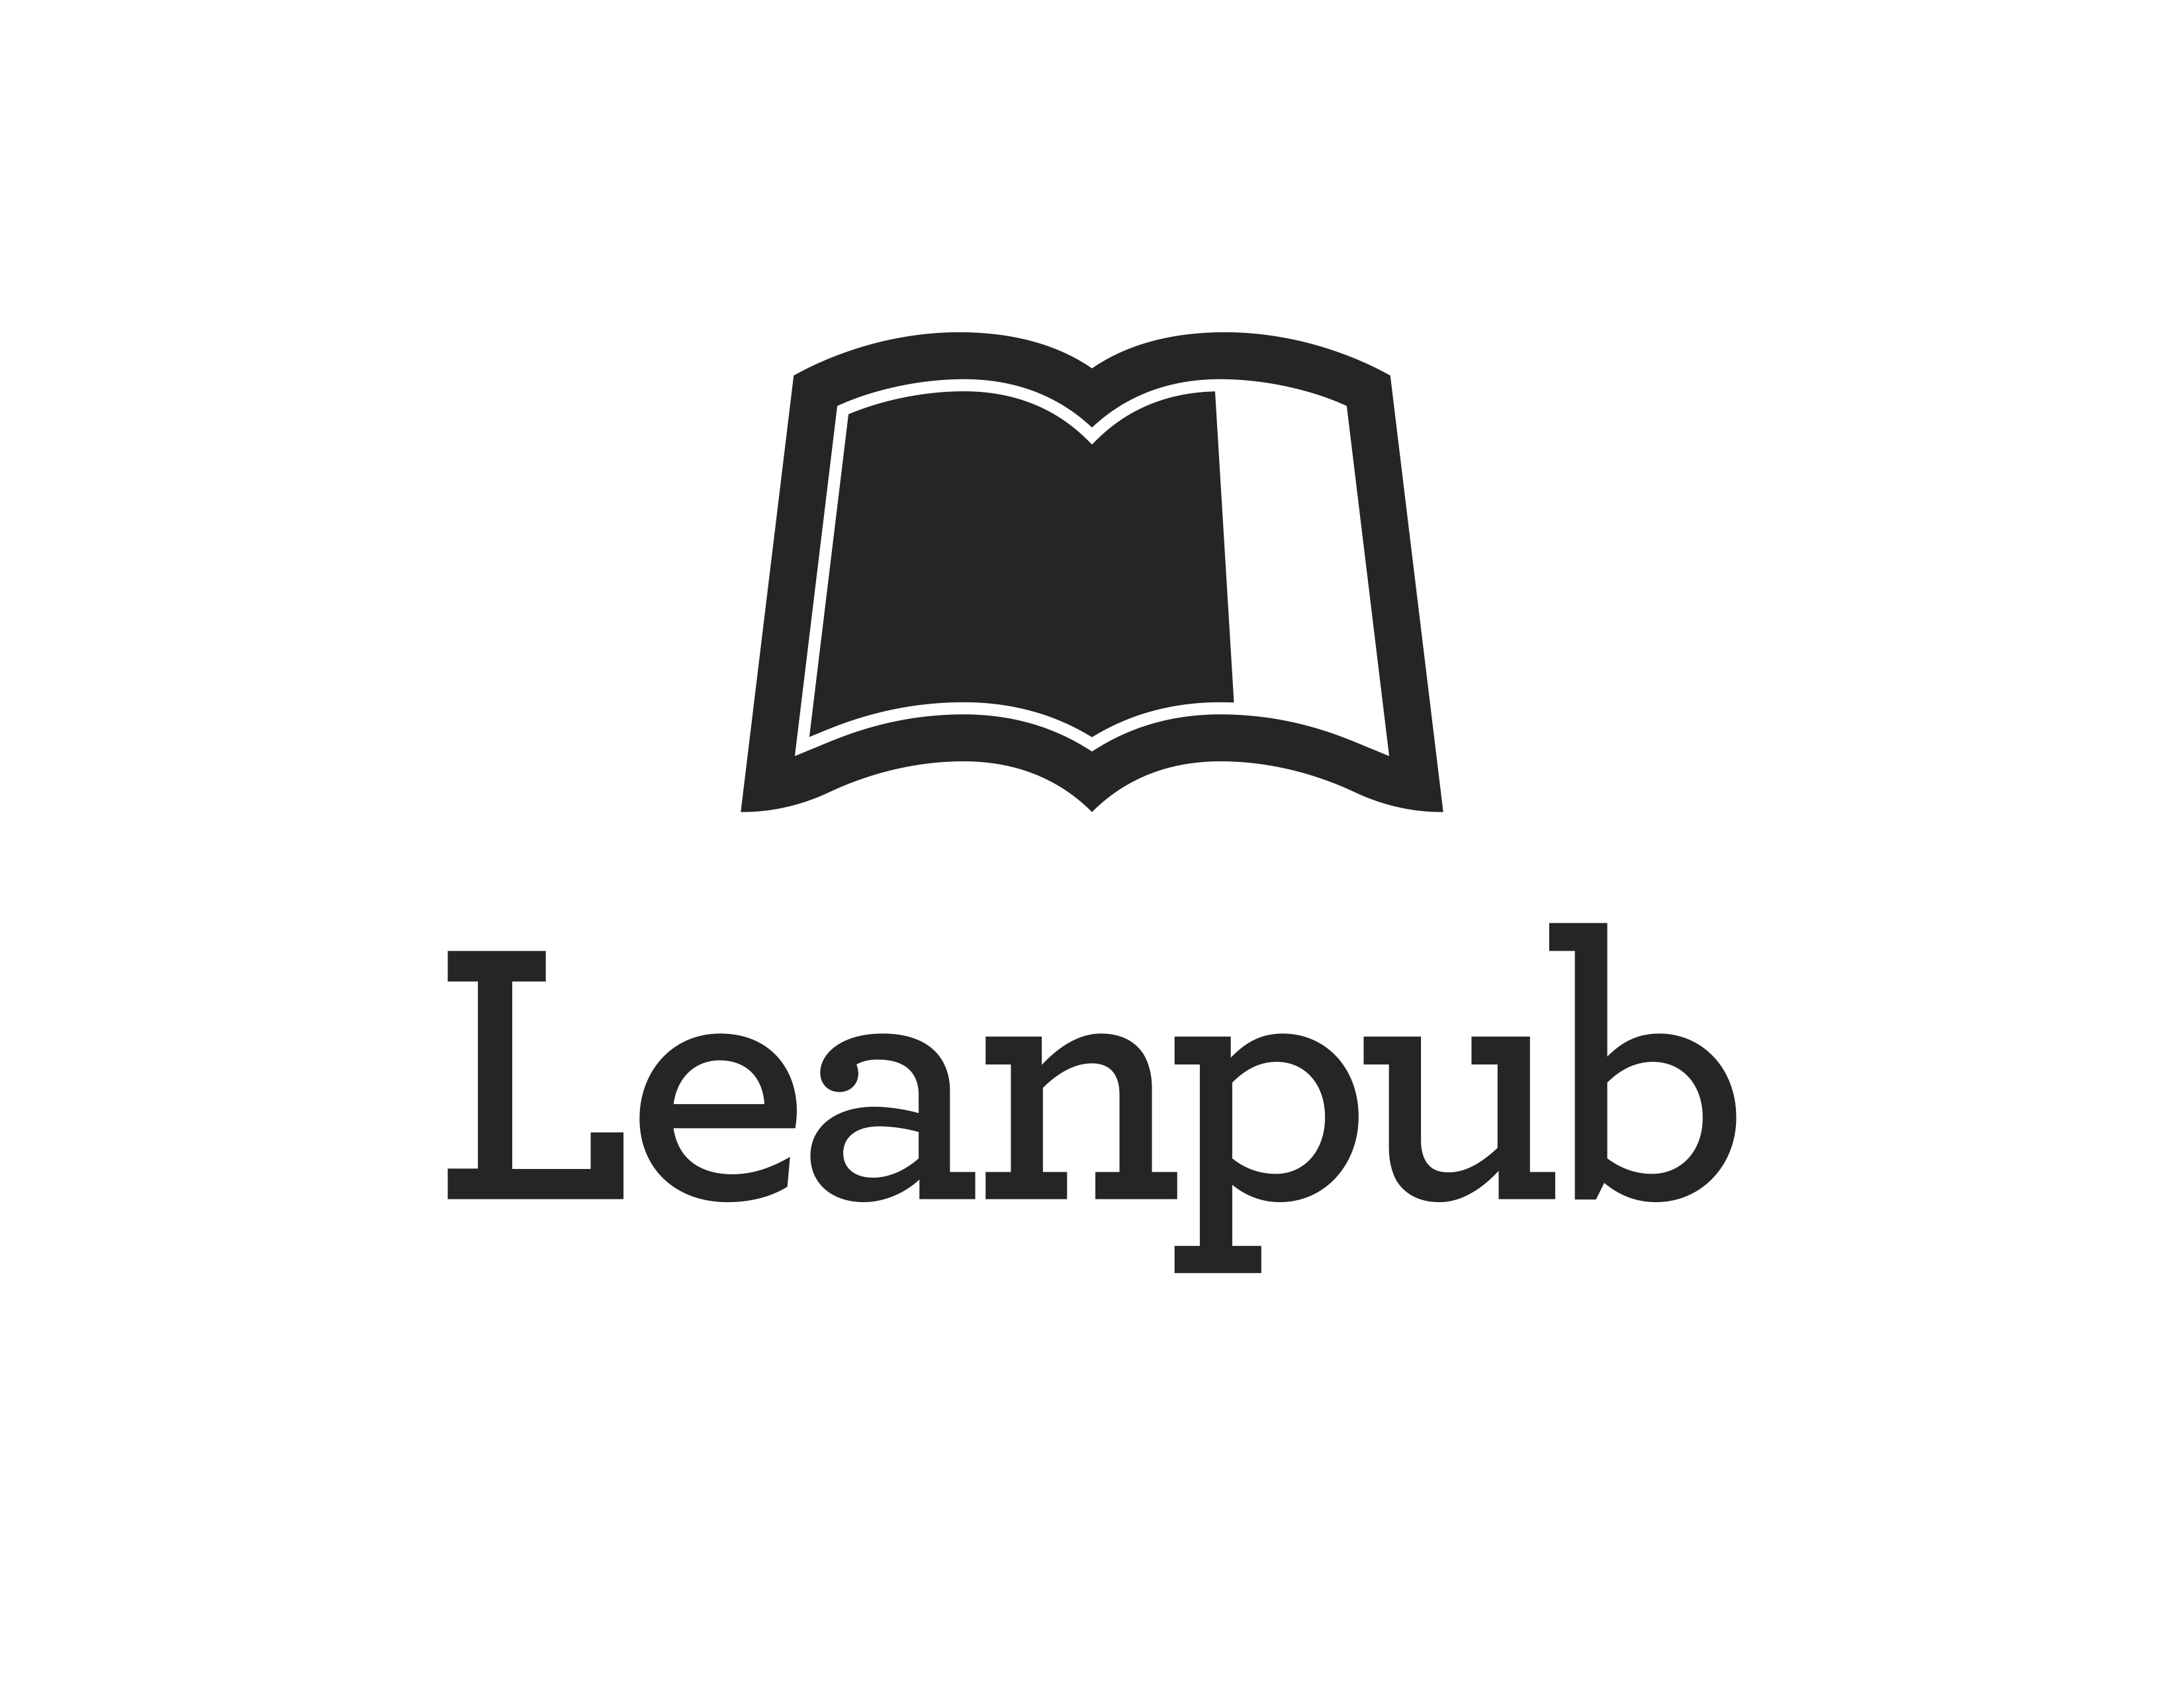 Leanpublogowithtext